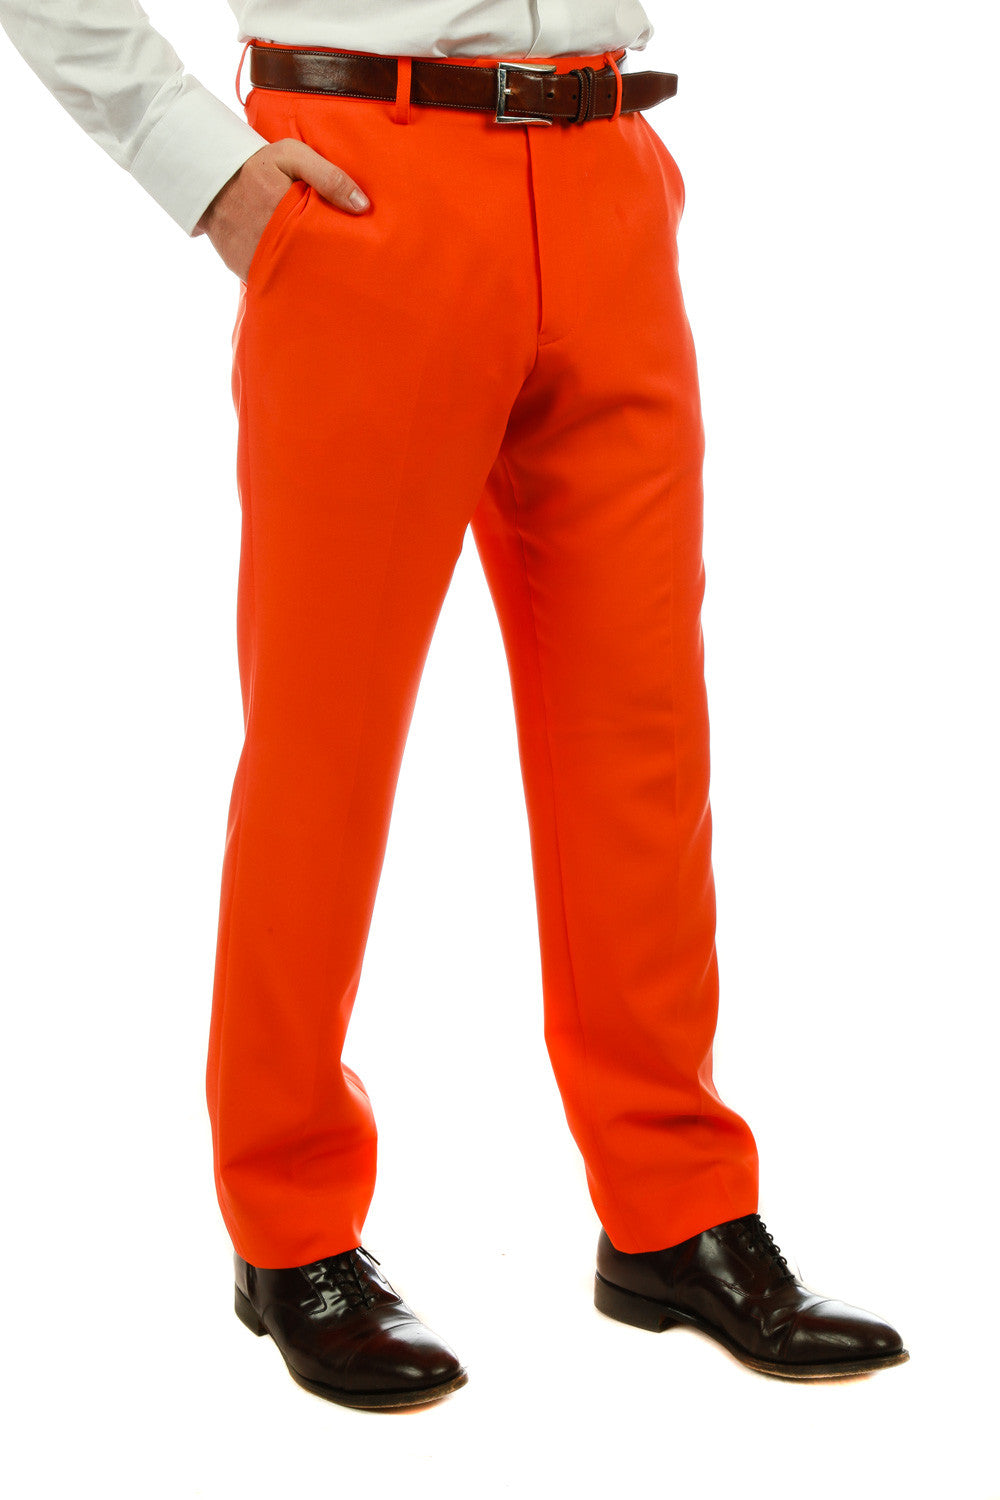 Orange Dress Pants with Mustard Blazer Outfits For Men 5 ideas  outfits   Lookastic